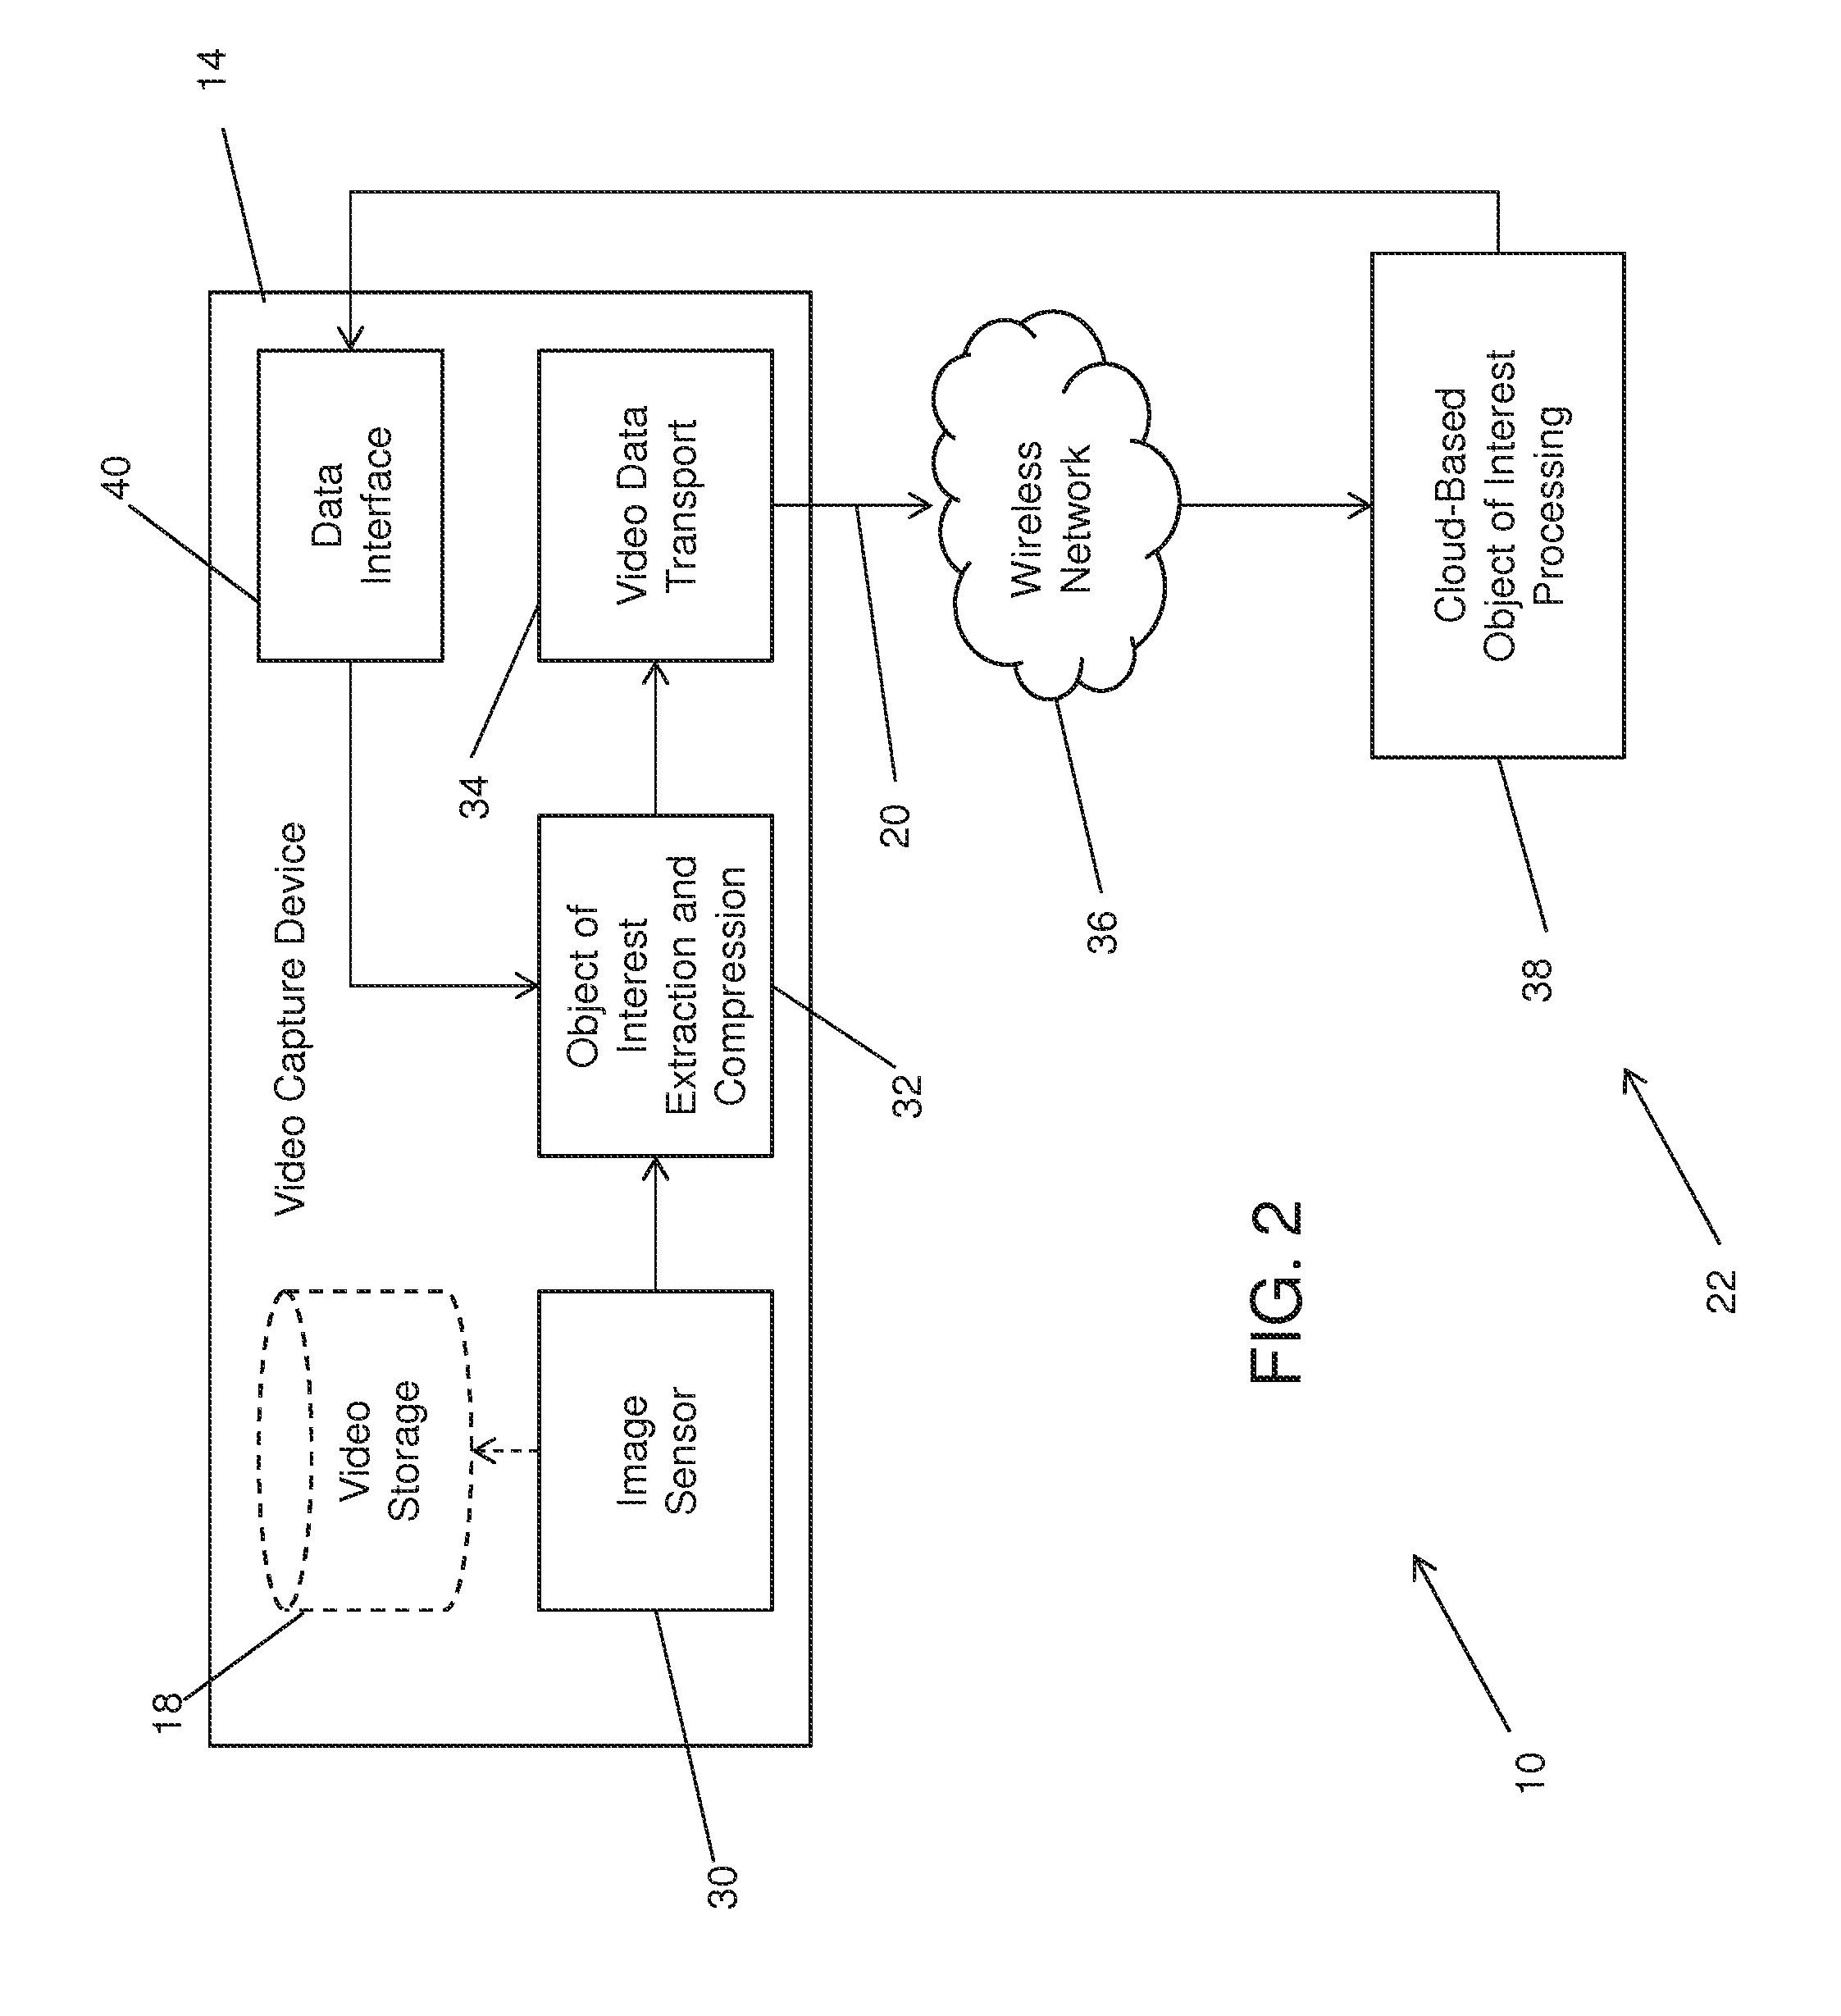 System and Method for Compressing Video Data